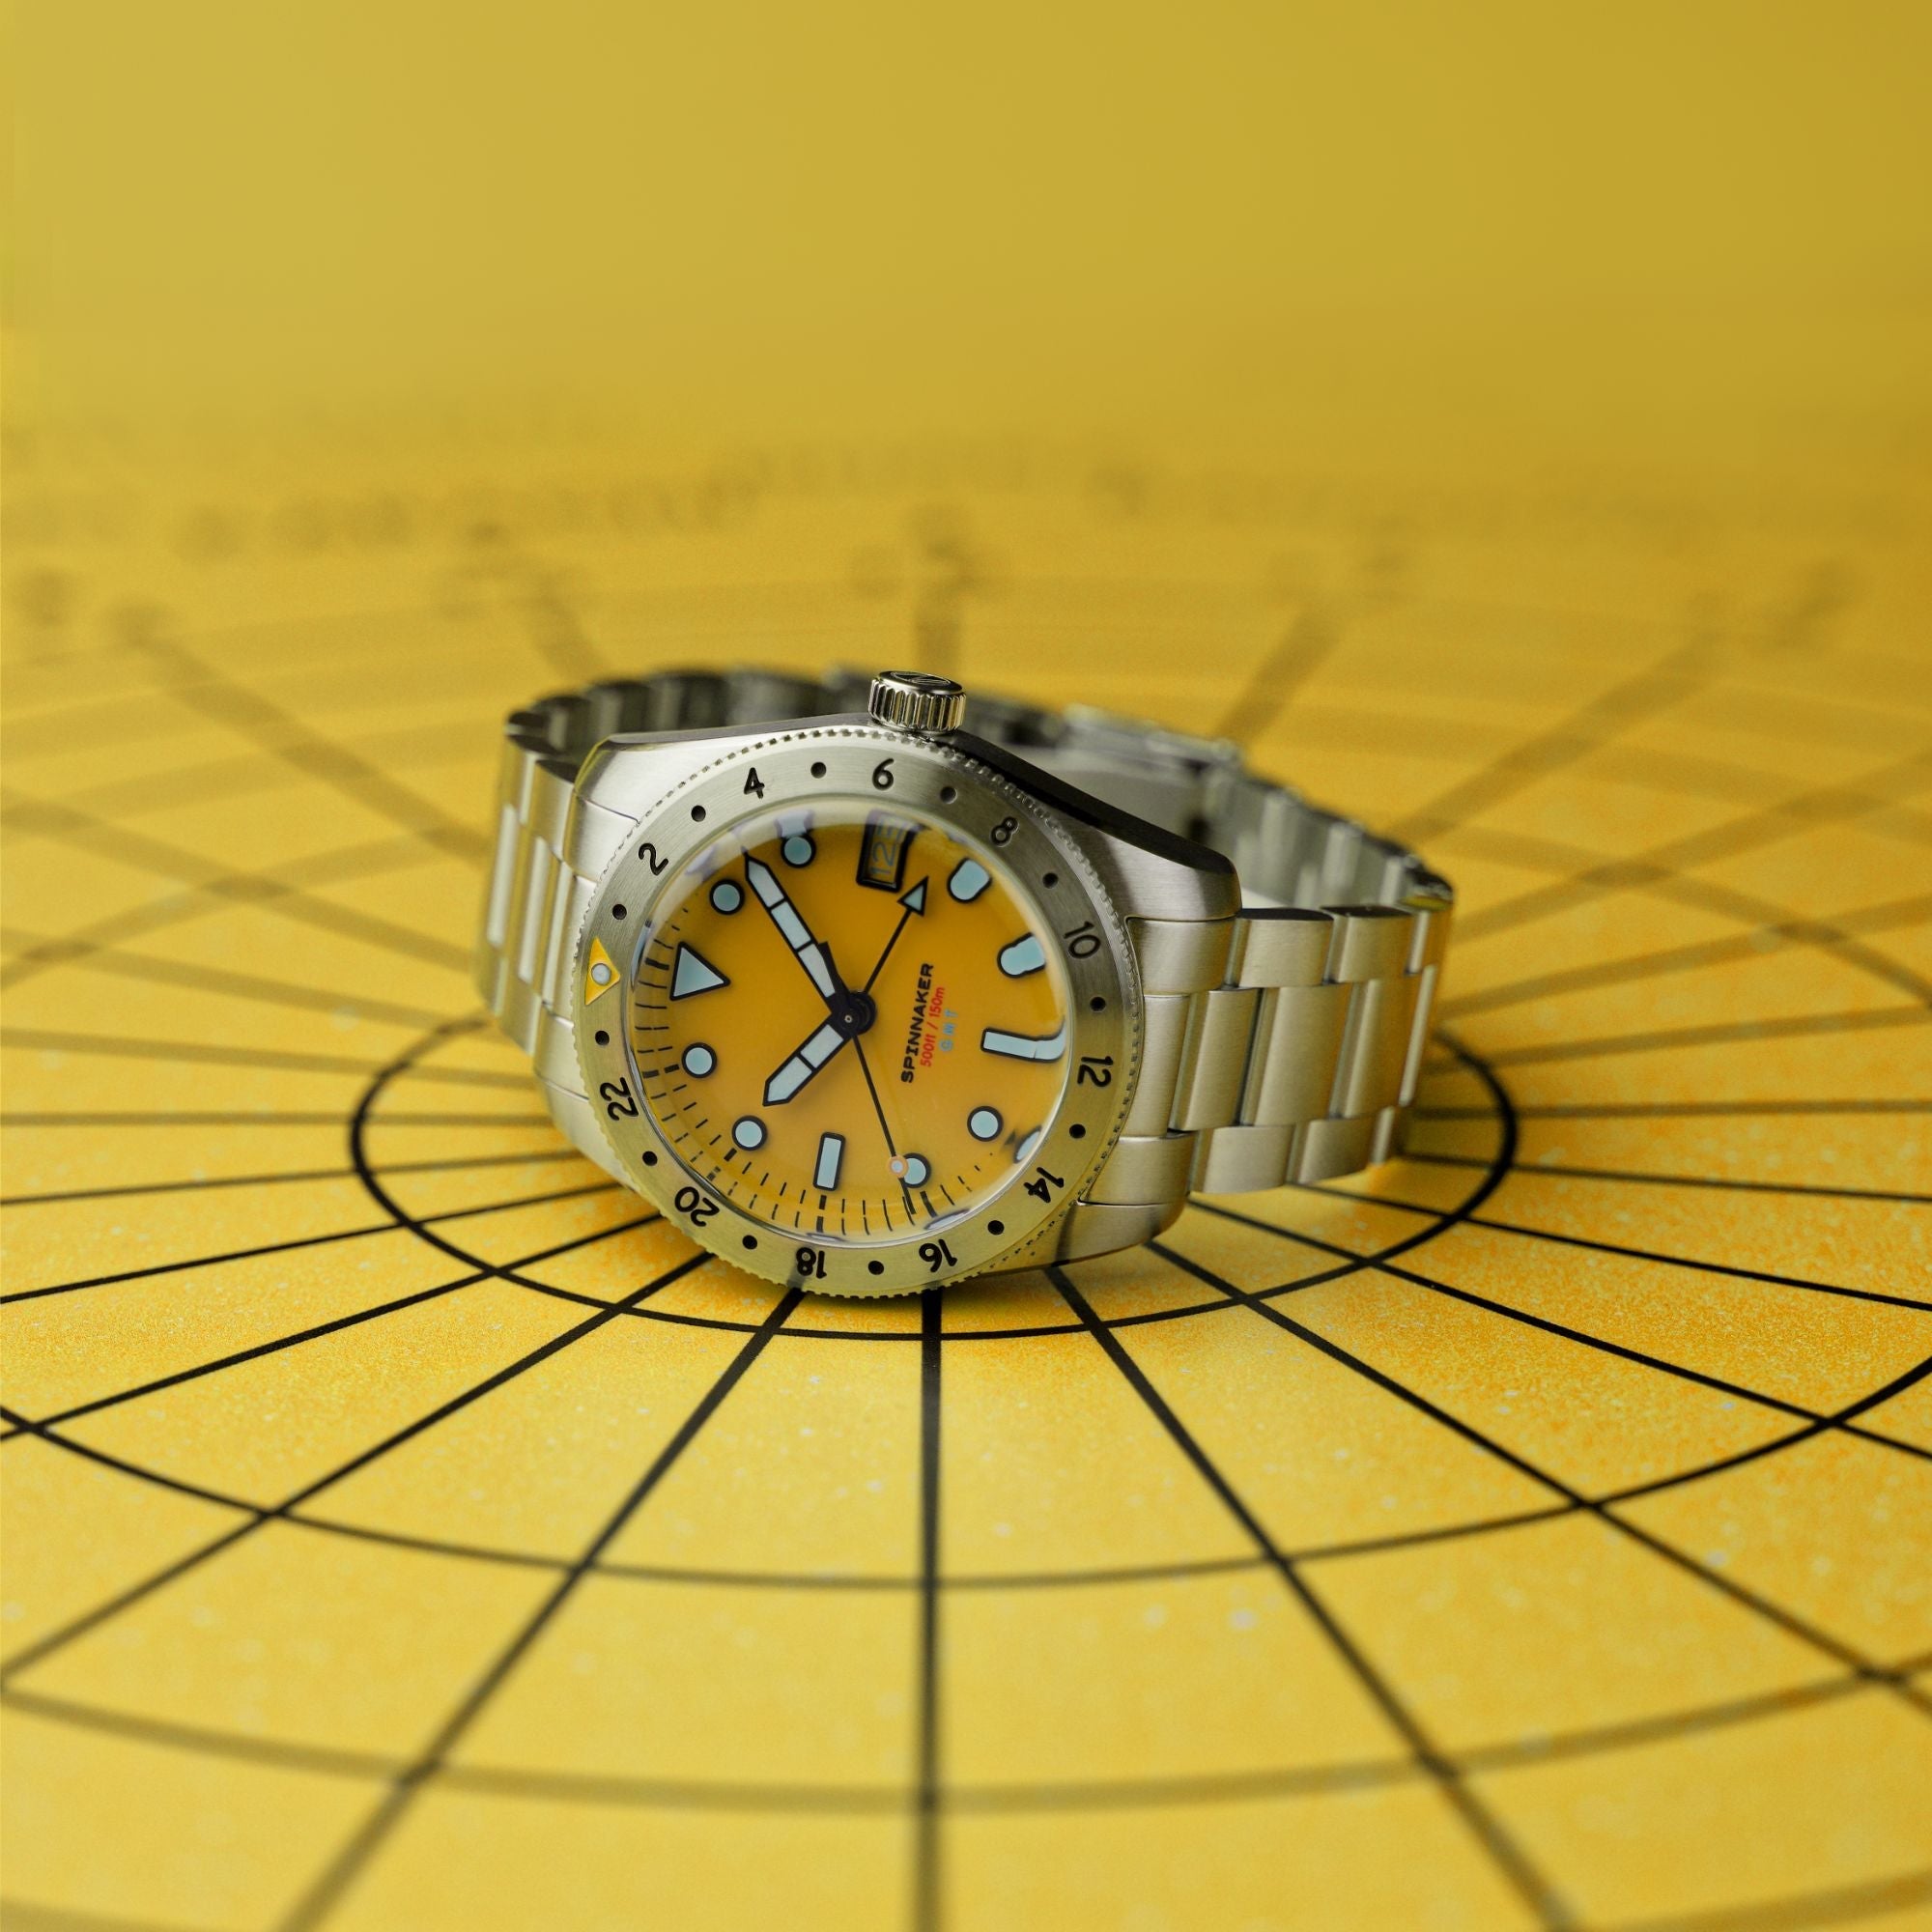 SPINNAKER Spinnaker Croft 3912 Gmt Automatic Limited Edition Dusk Yellow Men's Watch SP-5130-33